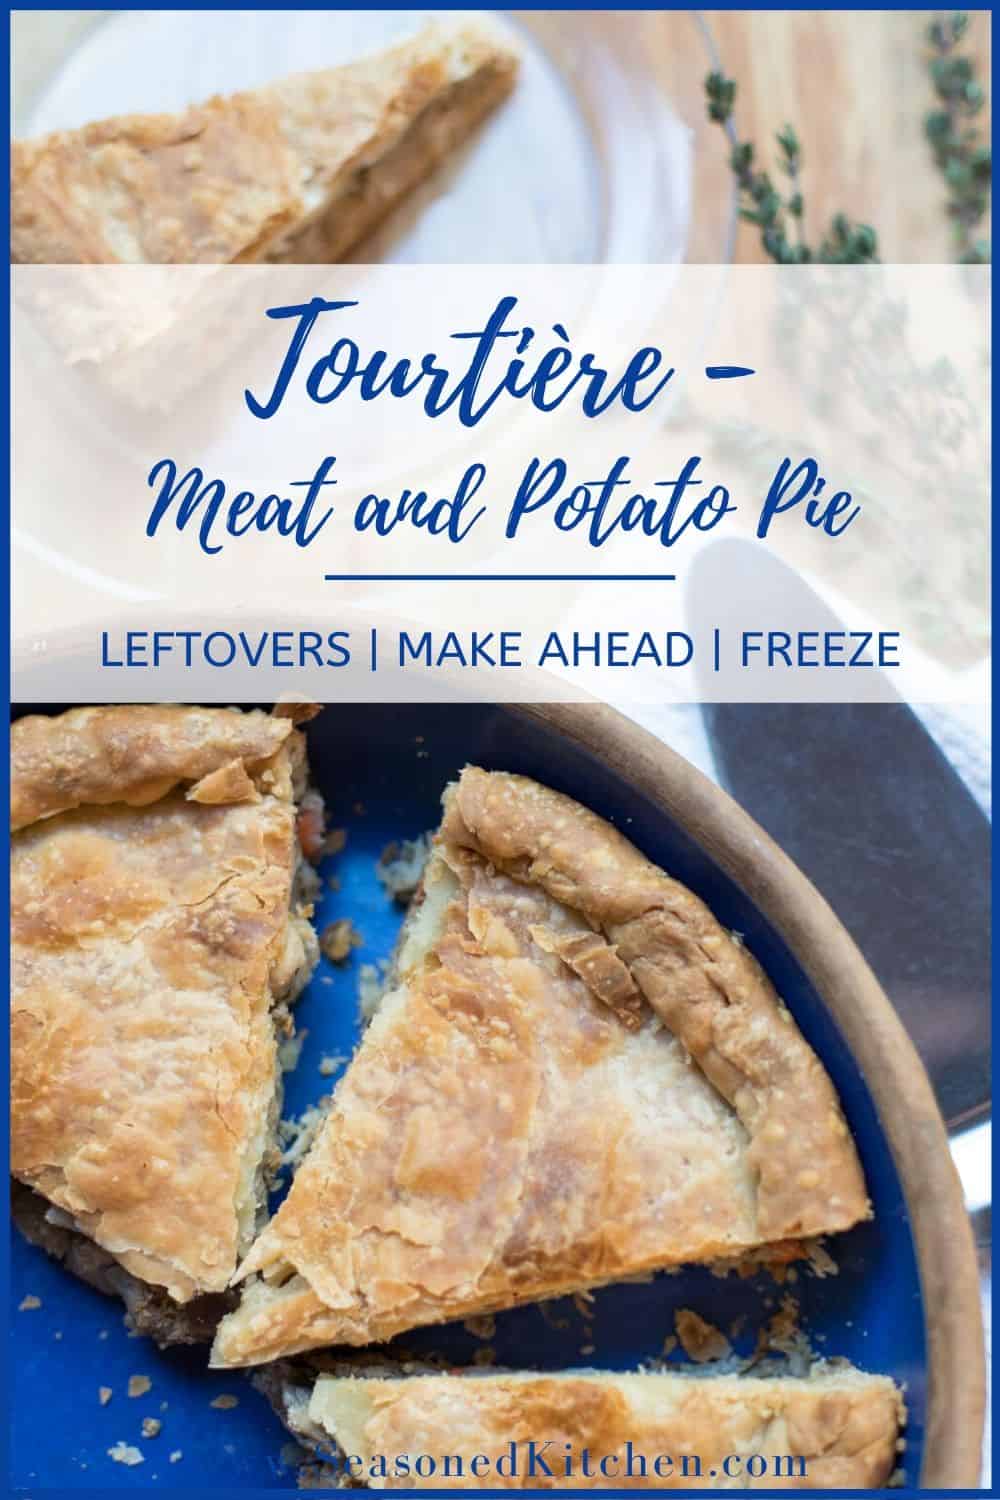 slices of tourtiere, one on a plate and others in a blue pie dish